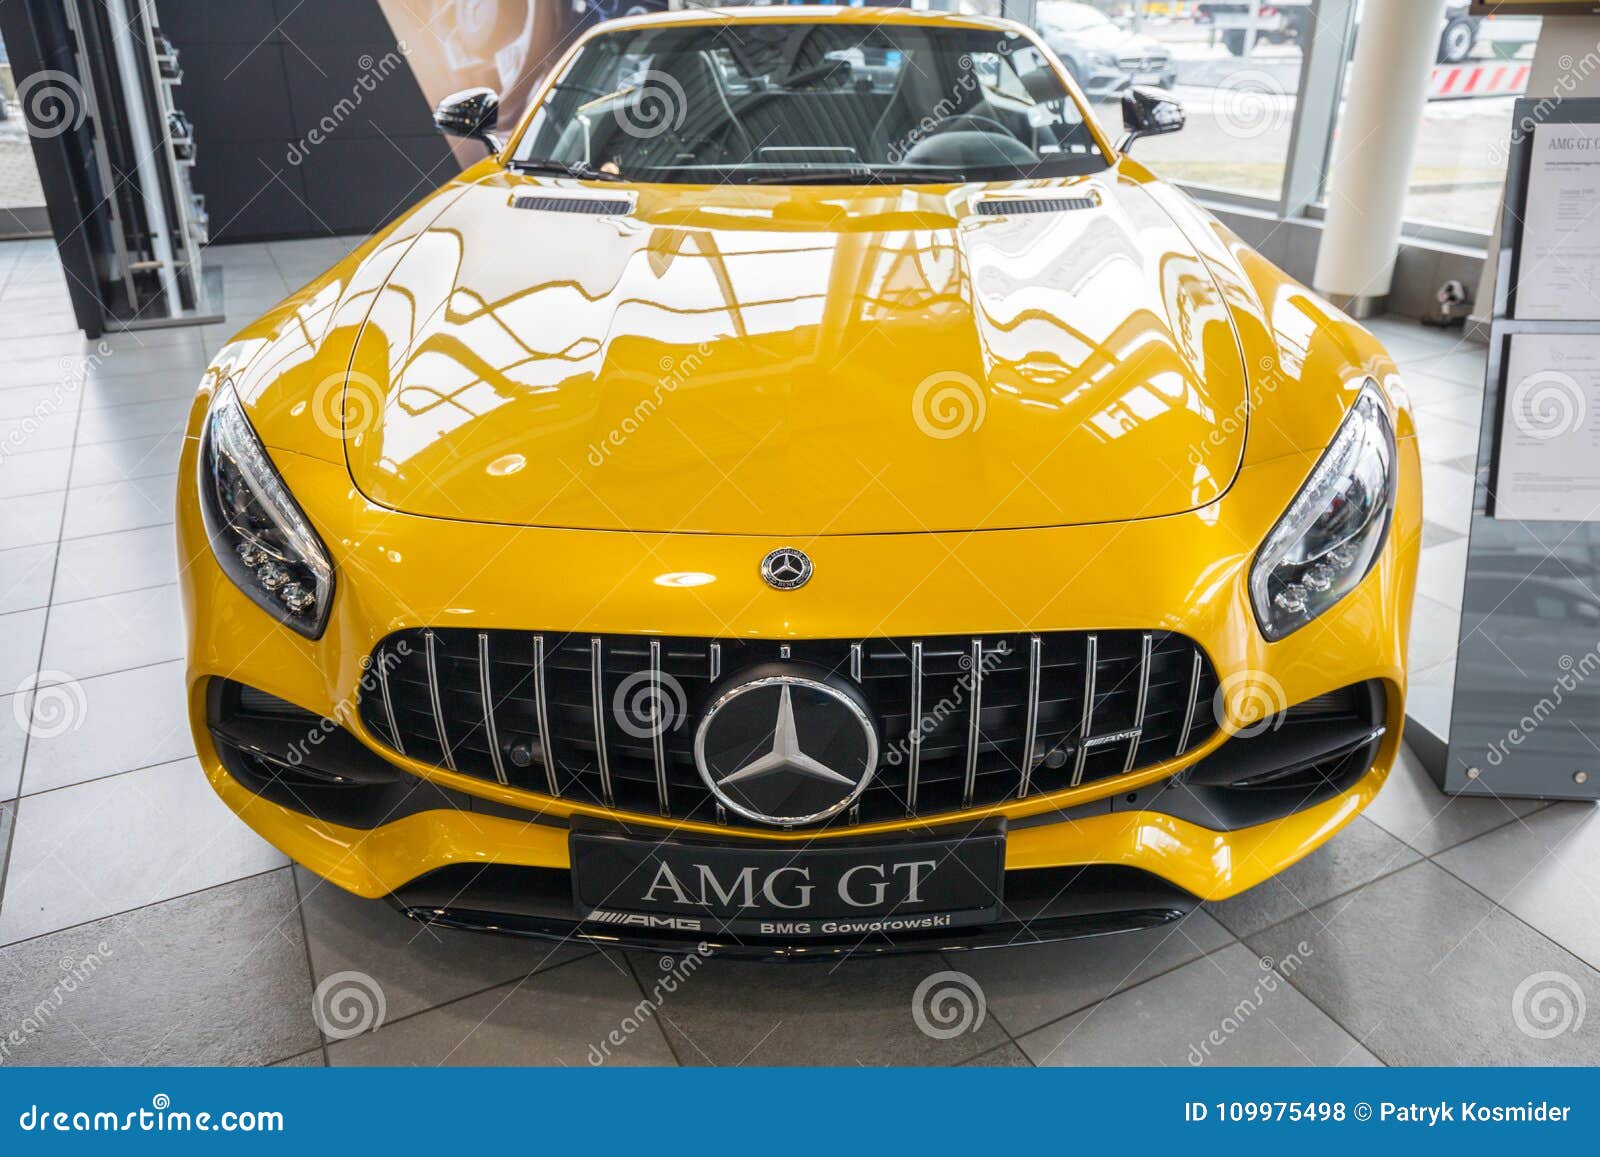 1 092 Yellow Mercedes Photos Free Royalty Free Stock Photos From Dreamstime